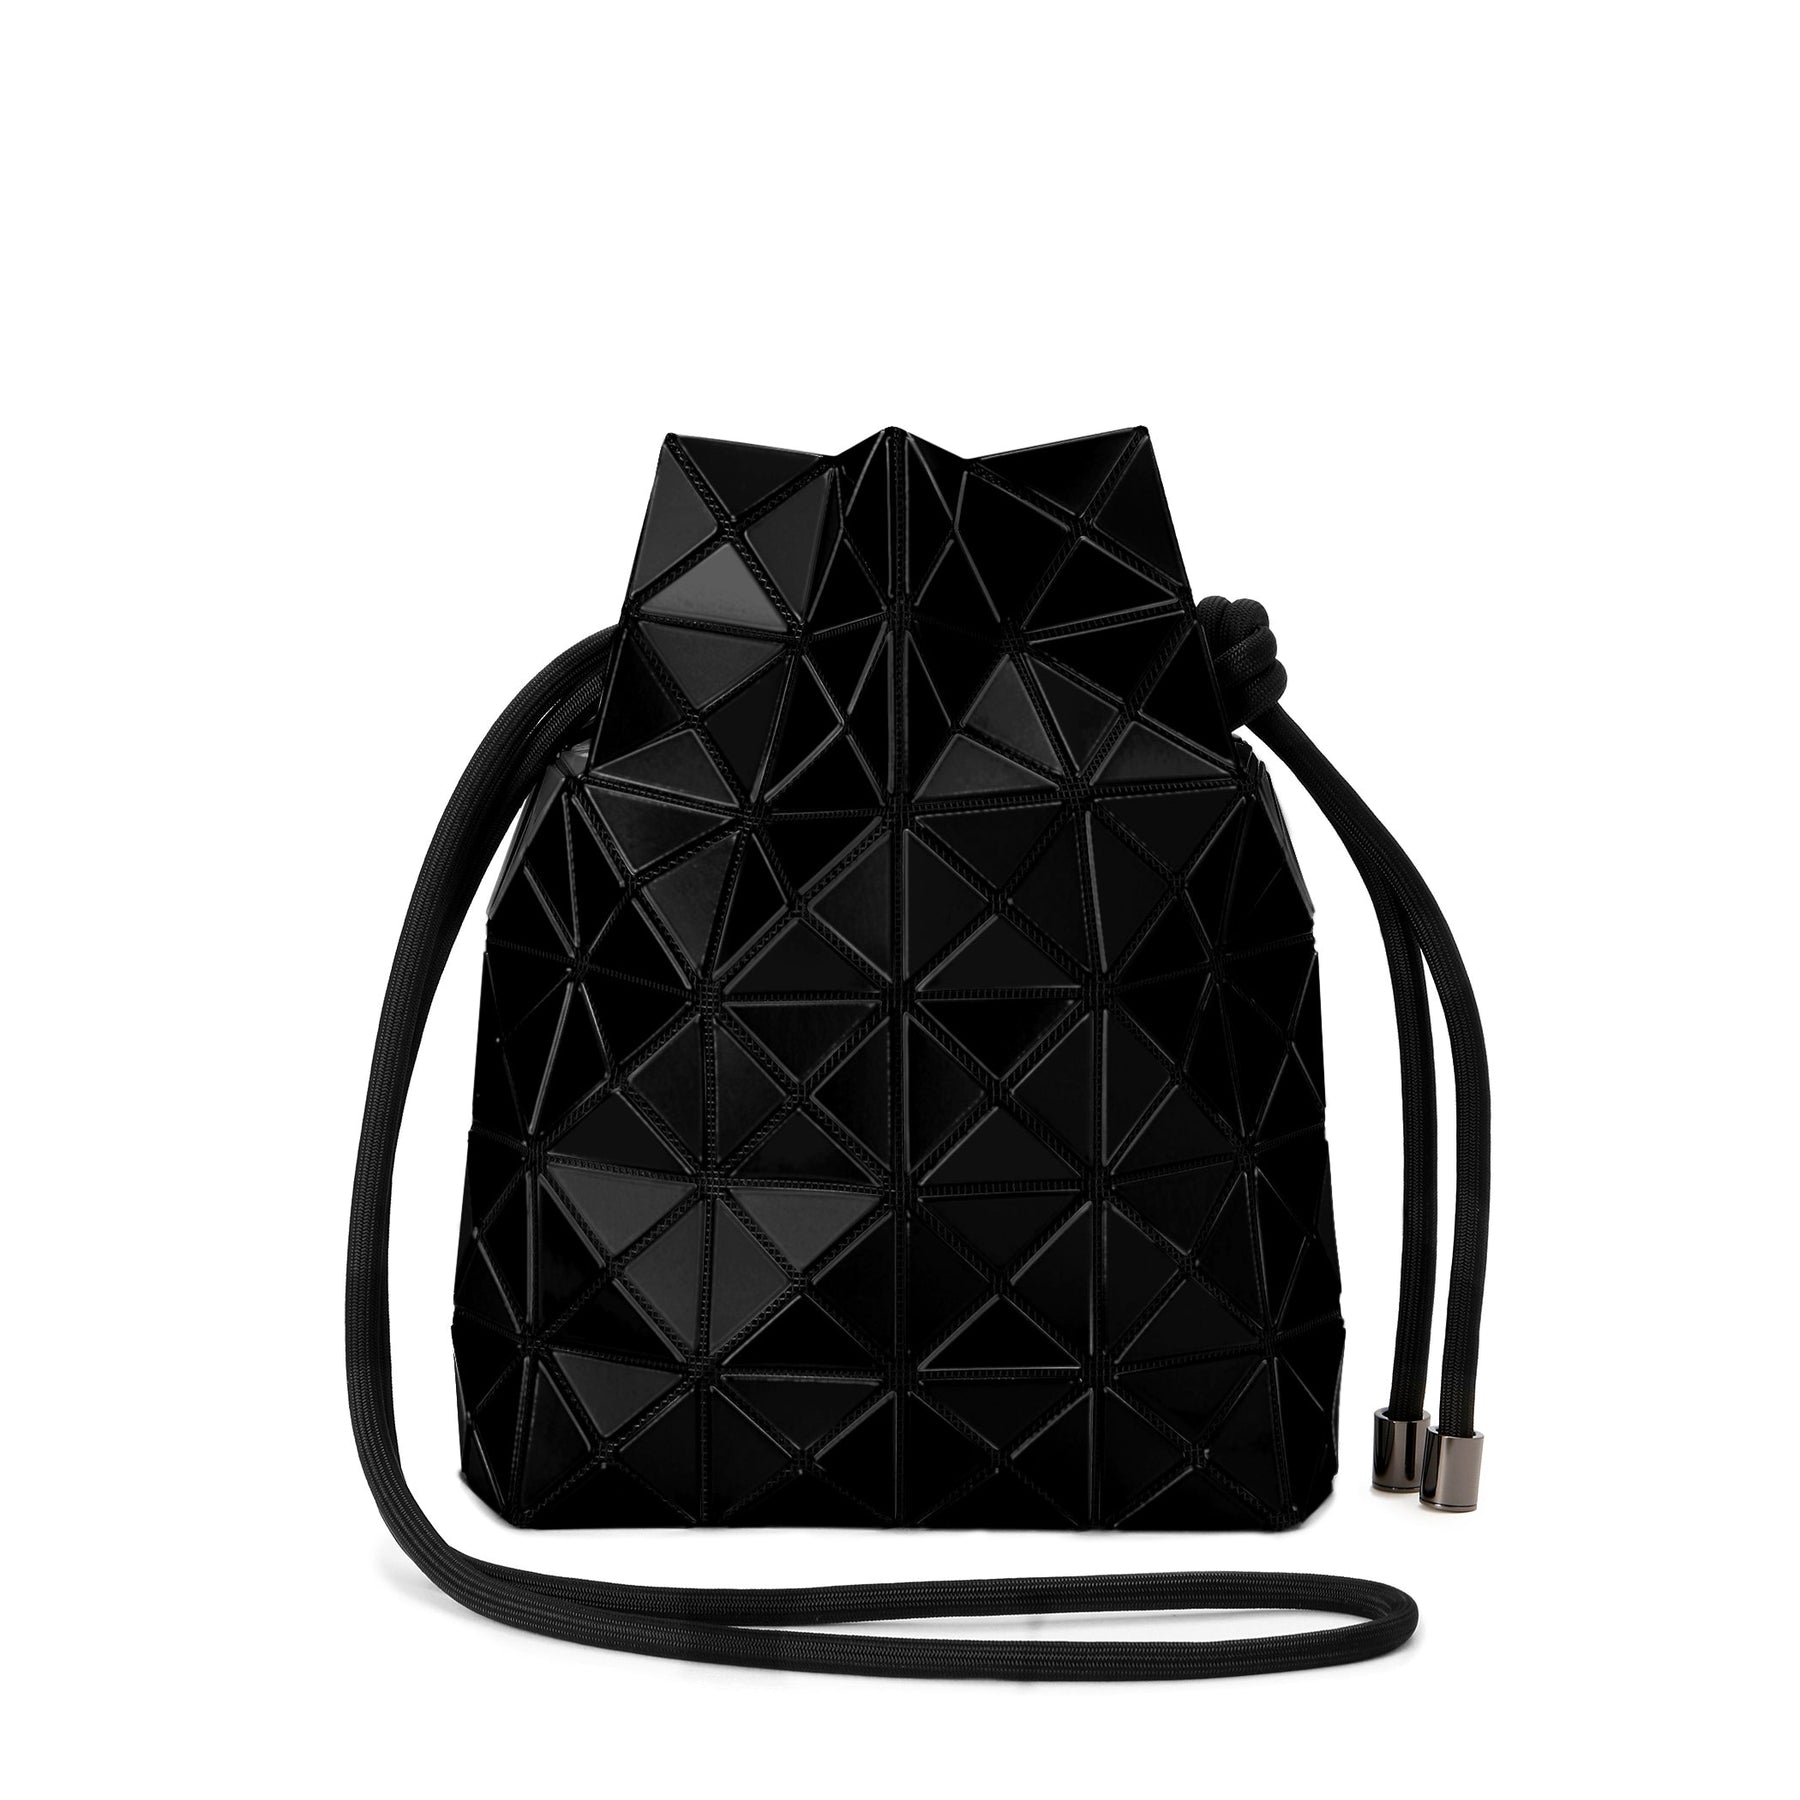 WRING SHOULDER BAG | The official ISSEY MIYAKE ONLINE STORE